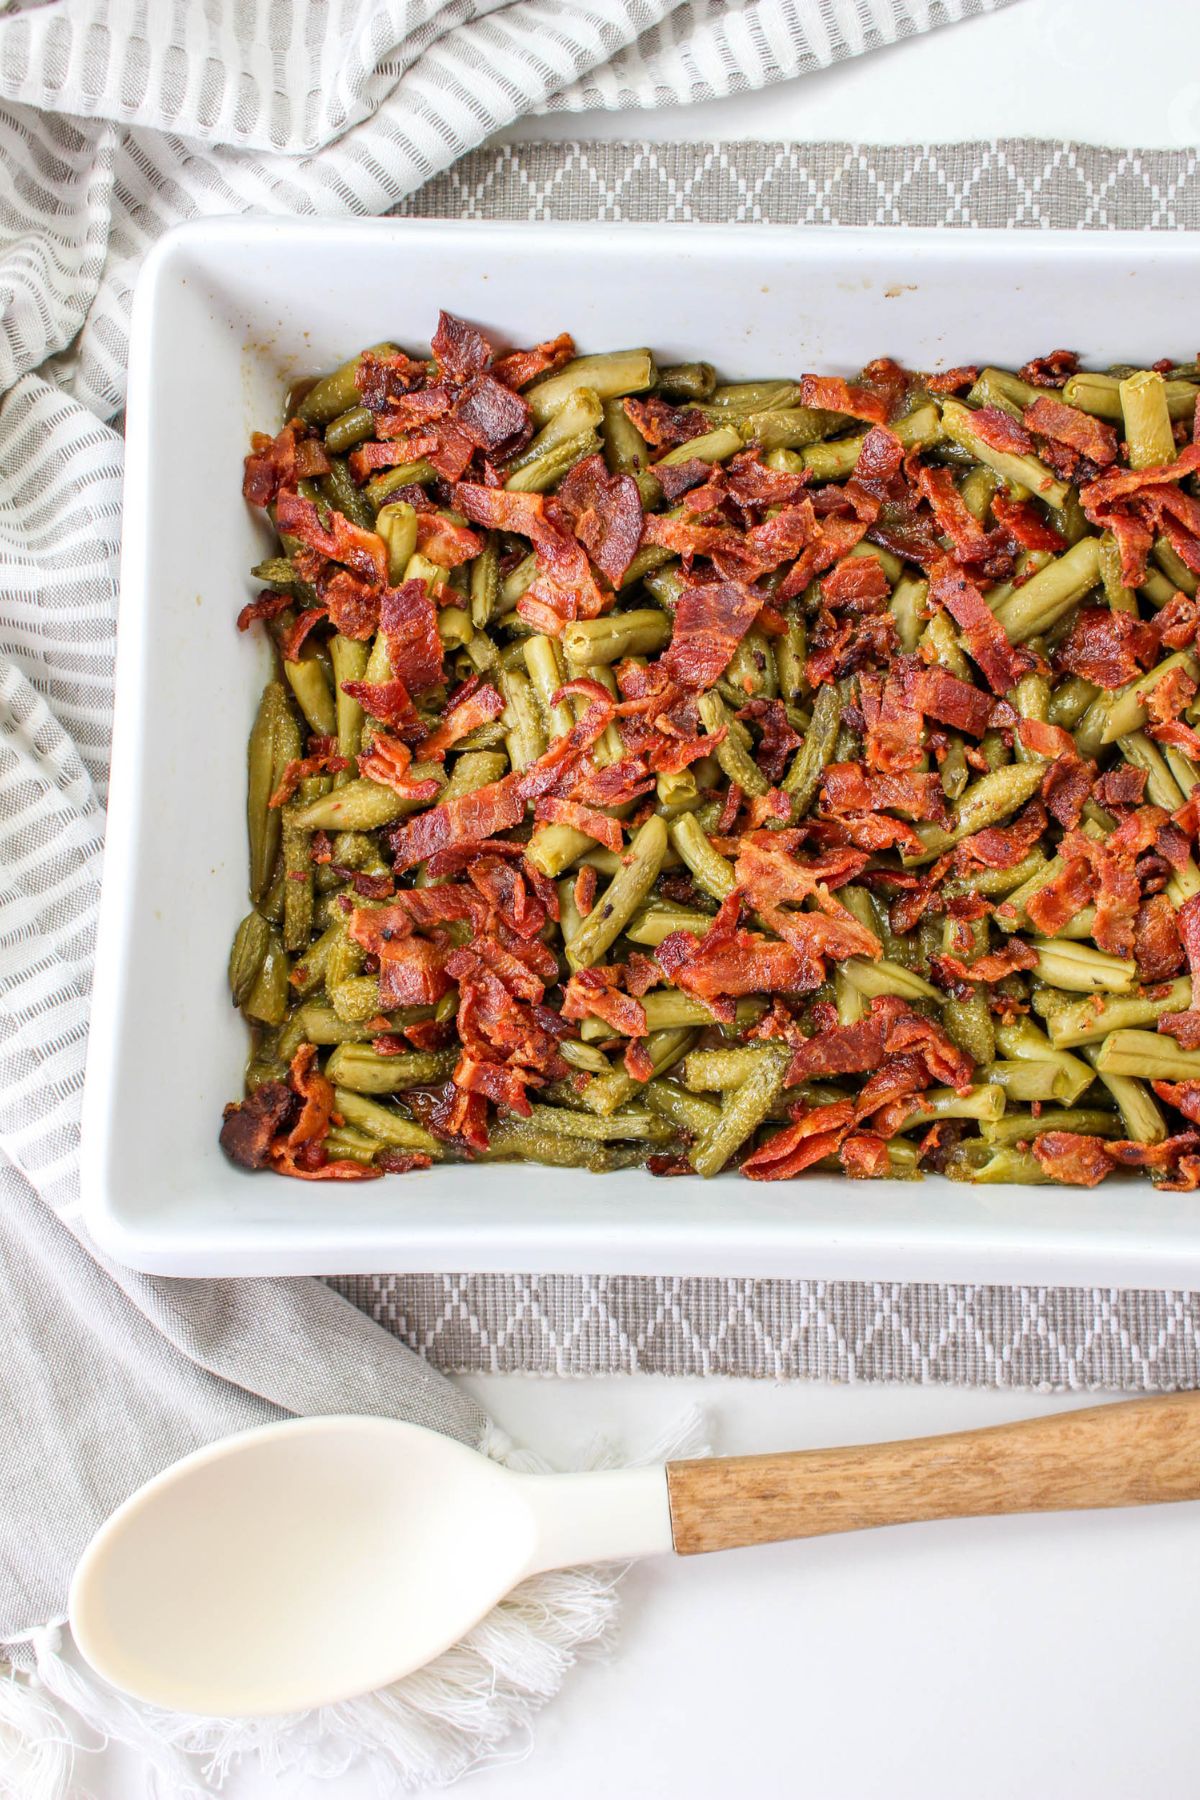 off center image of a casserole dish filled with crack green beans